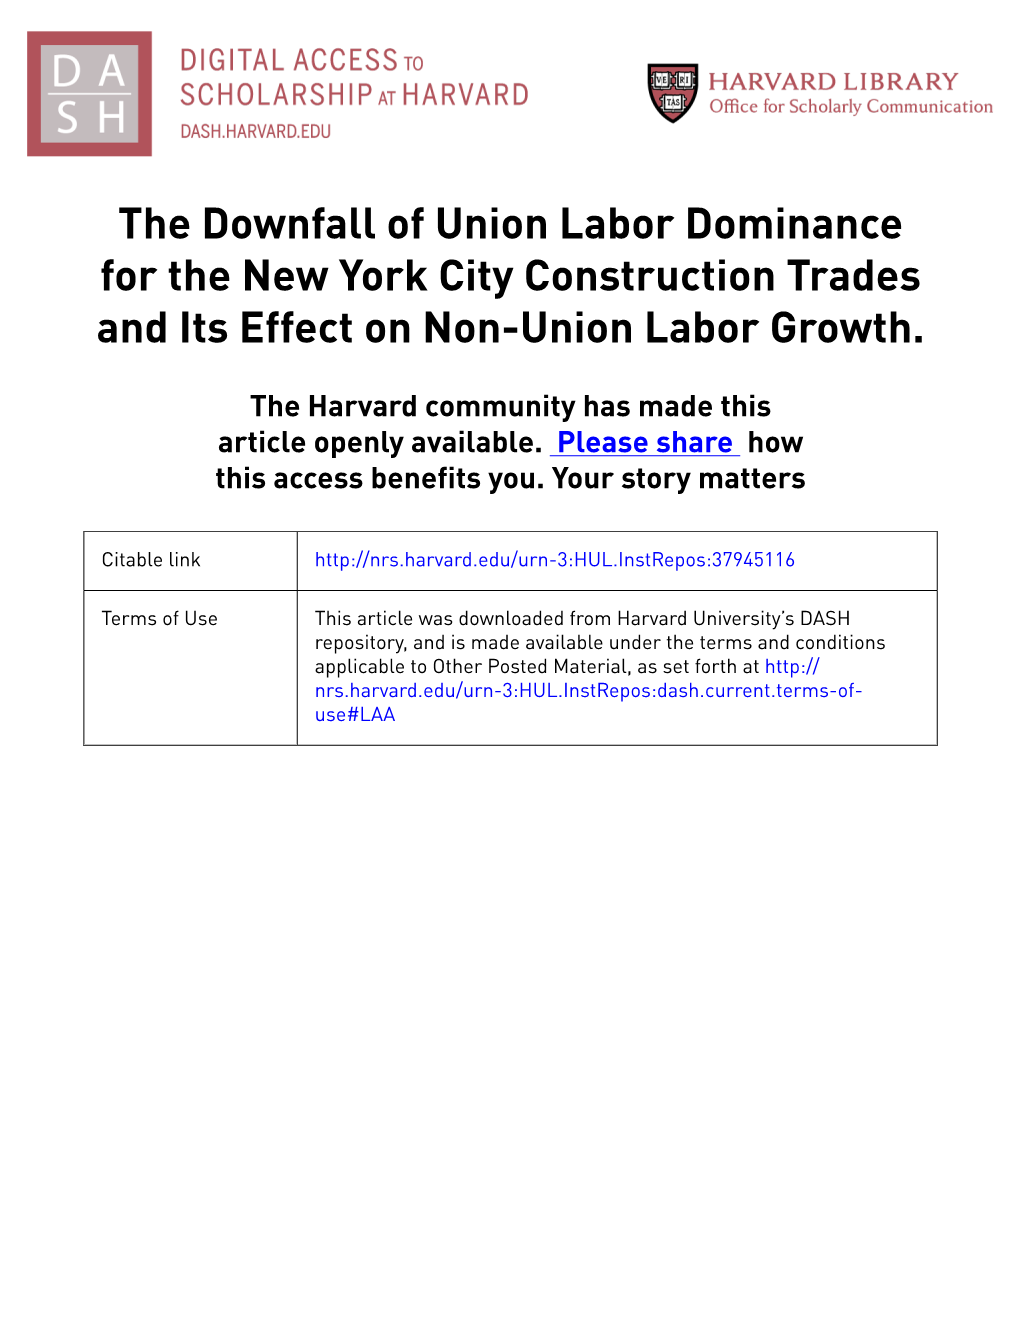 The Downfall of Union Labor Dominance for the New York City Construction Trades and Its Effect on Non-Union Labor Growth